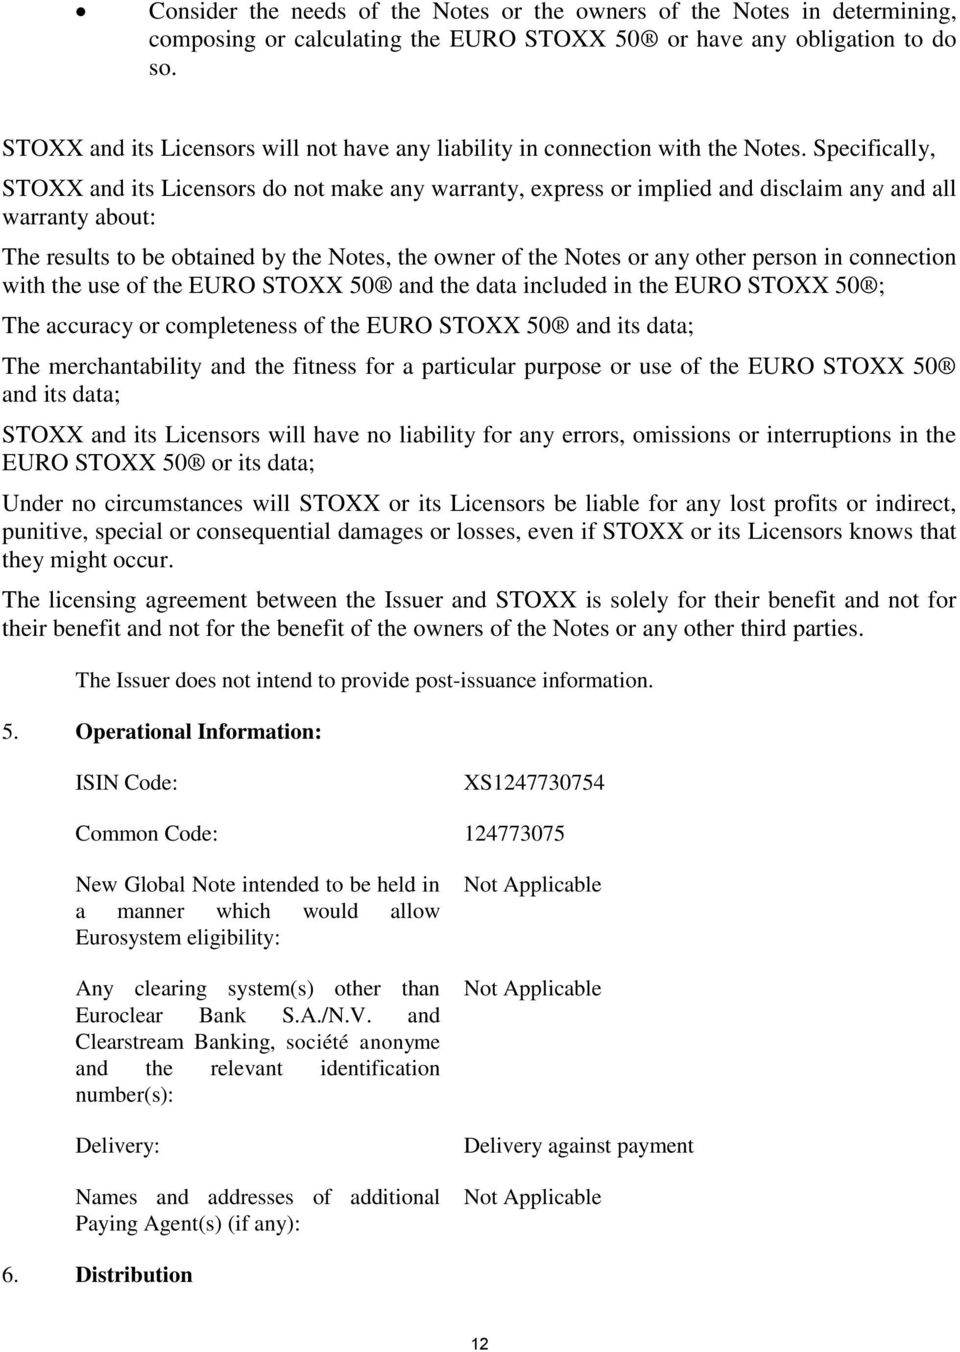 Specifically, STOXX and its Licensors do not make any warranty, express or implied and disclaim any and all warranty about: The results to be obtained by the Notes, the owner of the Notes or any